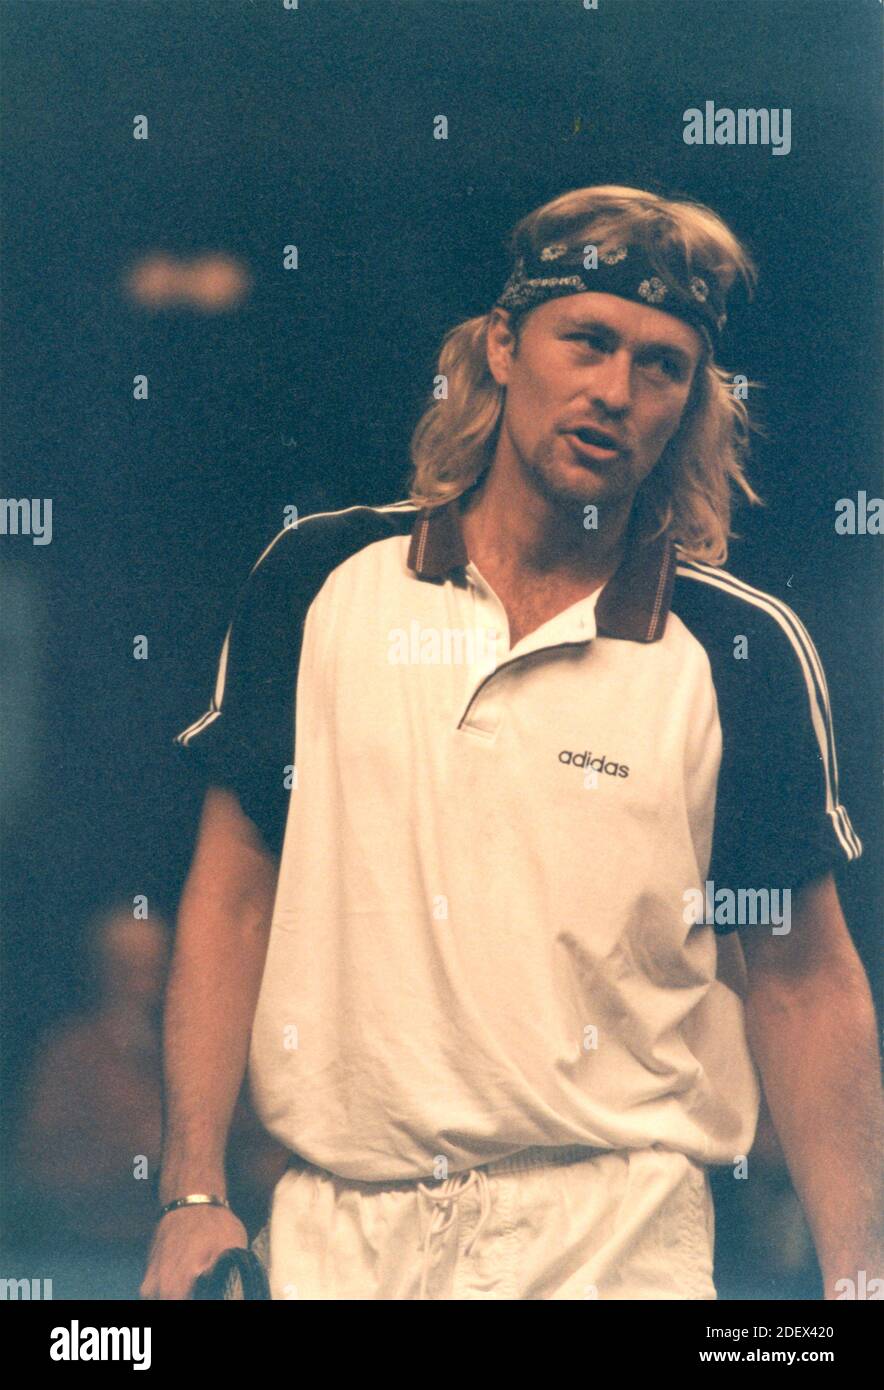 South African tennis player Gary Muller, 1995 Stock Photo